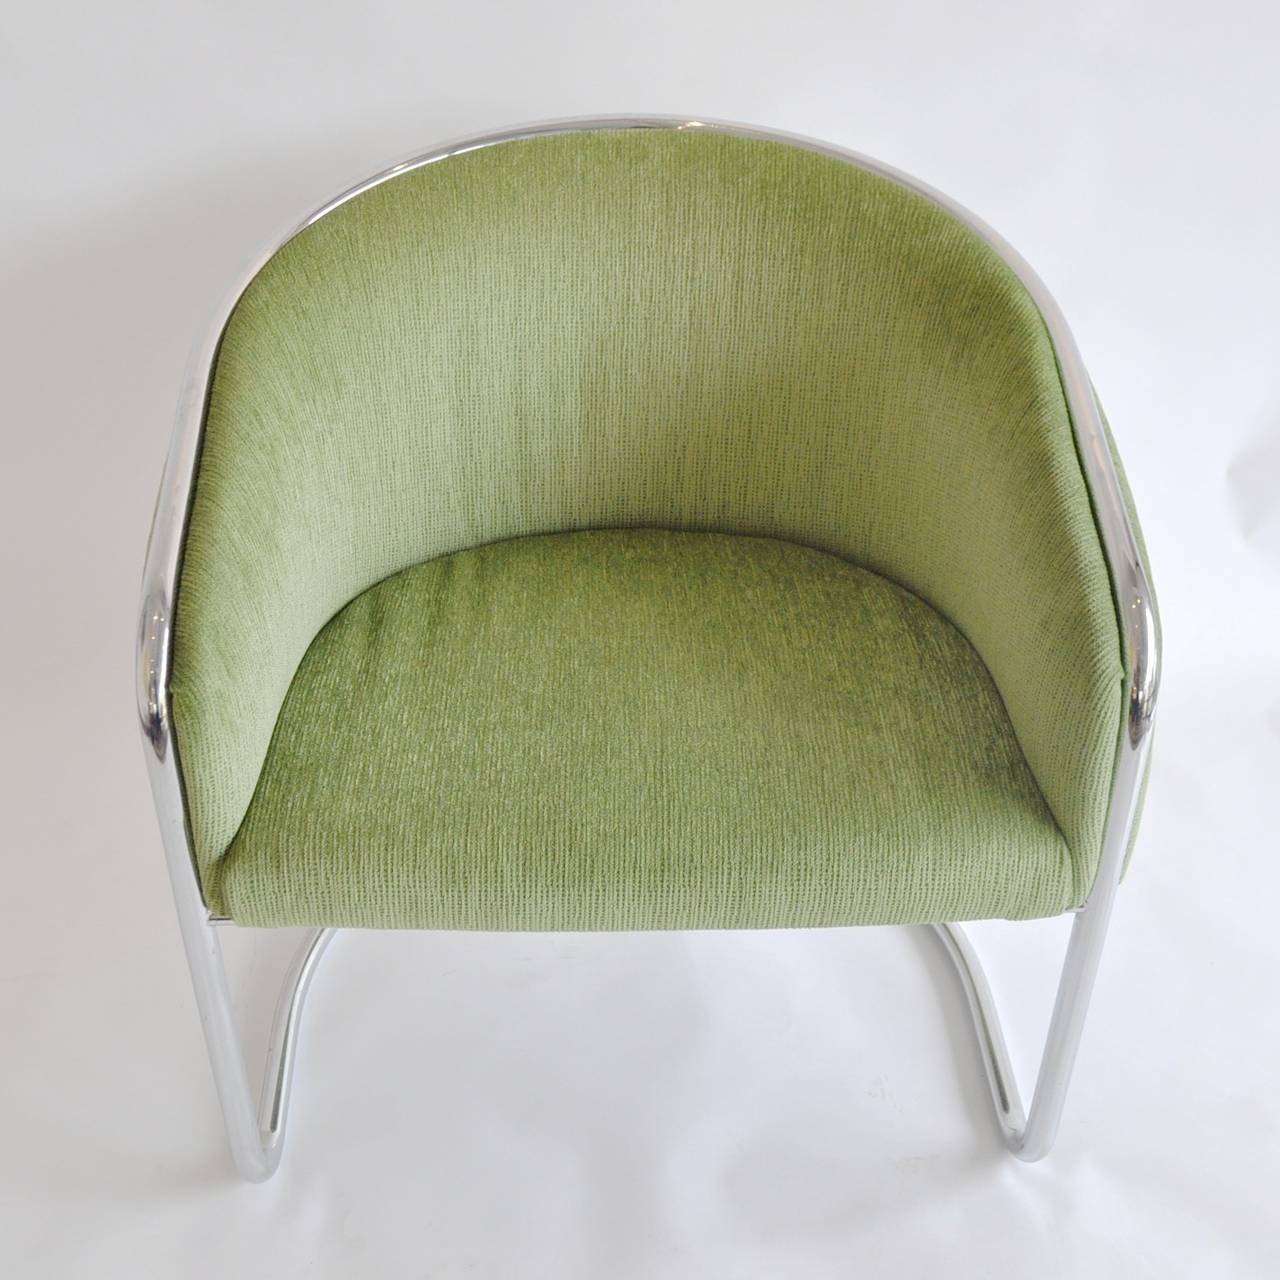 Newly recovered in a green chenille fabric this Milo Baughman-style chair is a  classic addition to any mid-century modern inspired room.